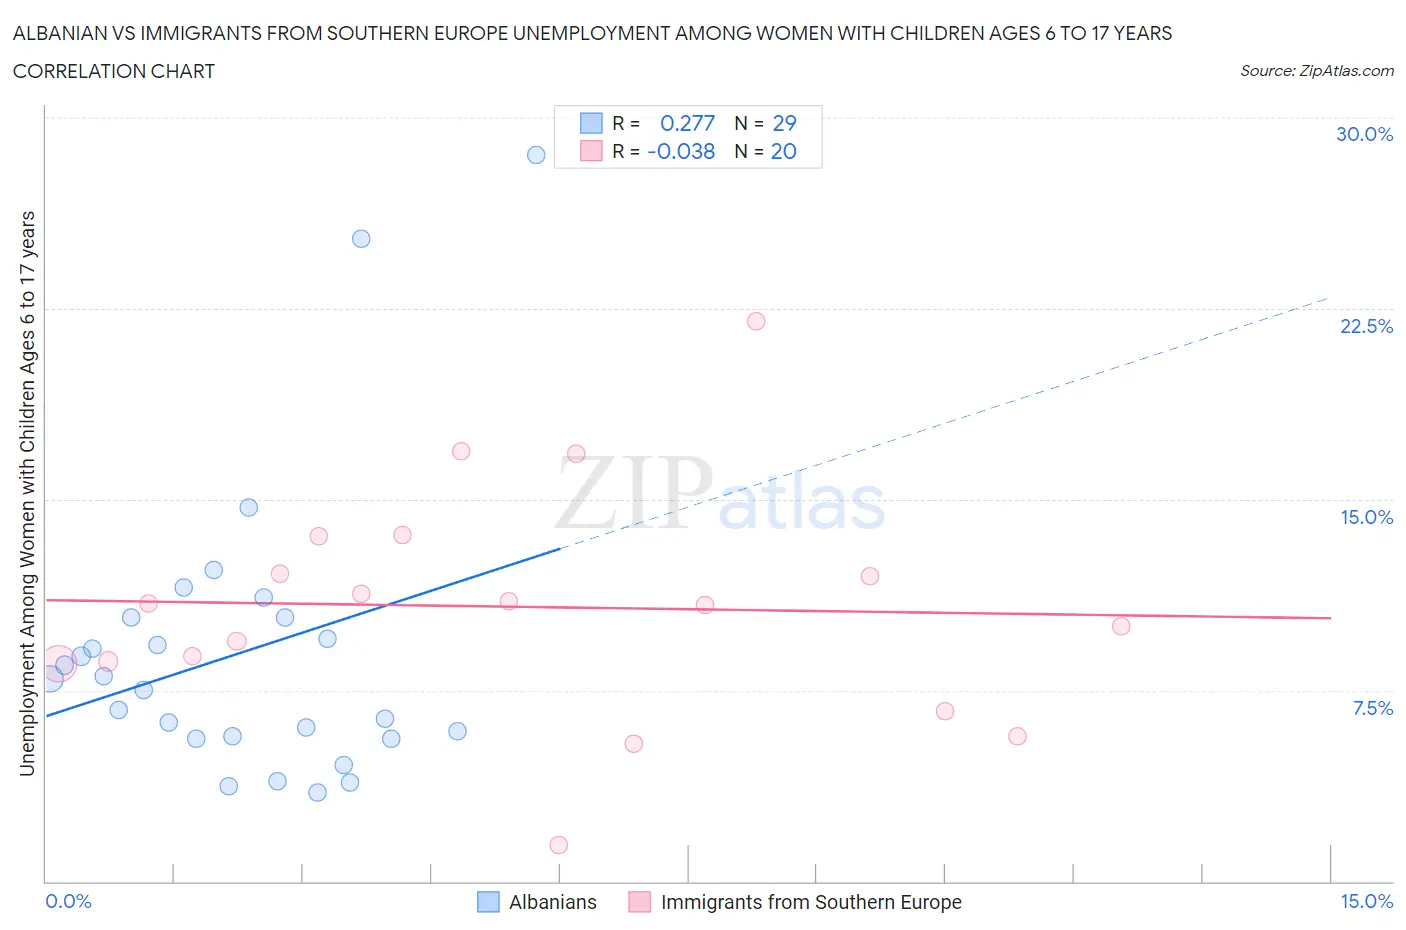 Albanian vs Immigrants from Southern Europe Unemployment Among Women with Children Ages 6 to 17 years